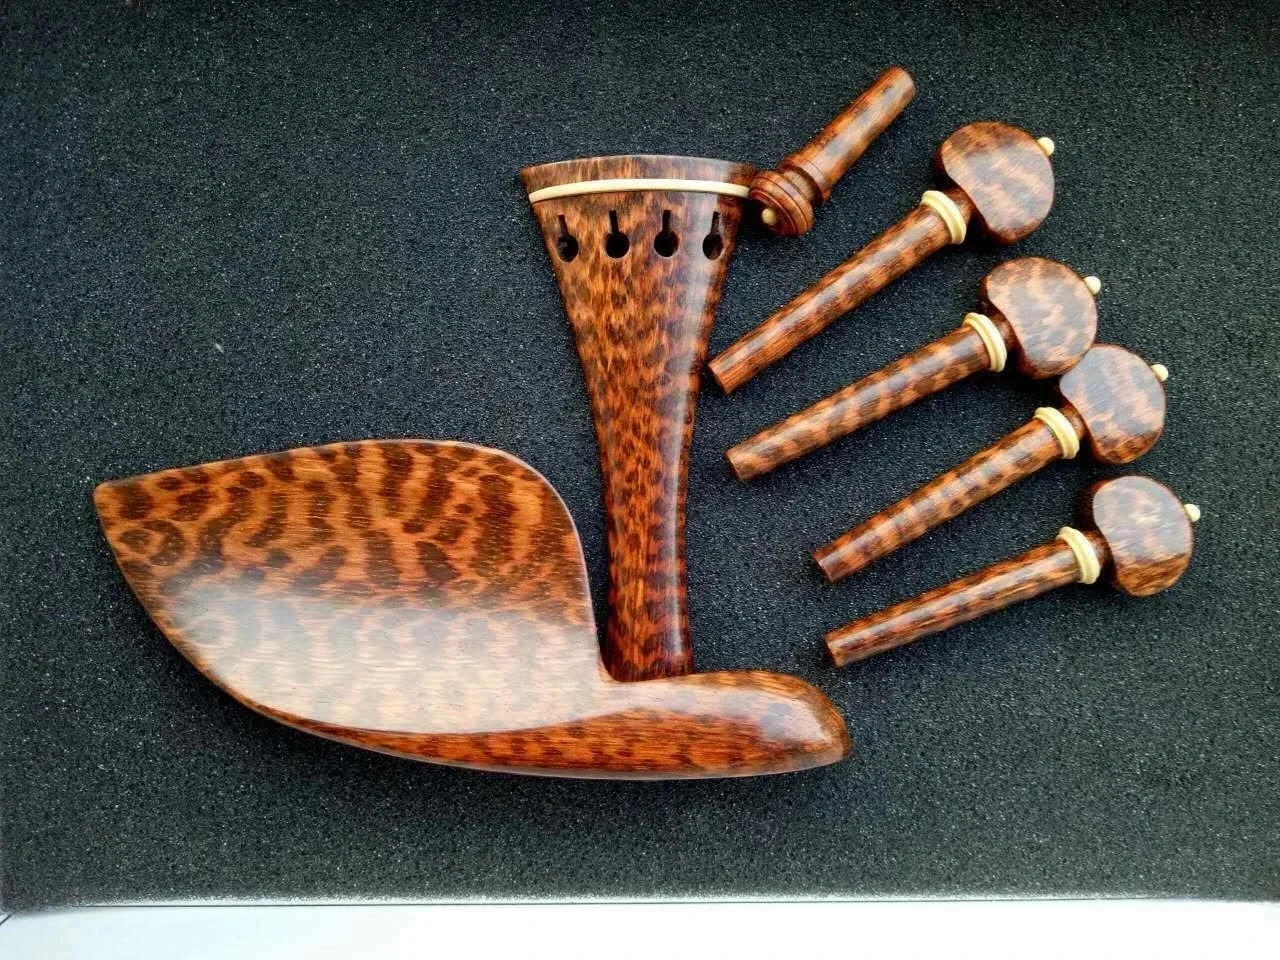 

High quality 1set viola snakewood letterwood parts fittings,Tailpiece+Tuning pegs+Endpins+Chin rest/Chin Holder